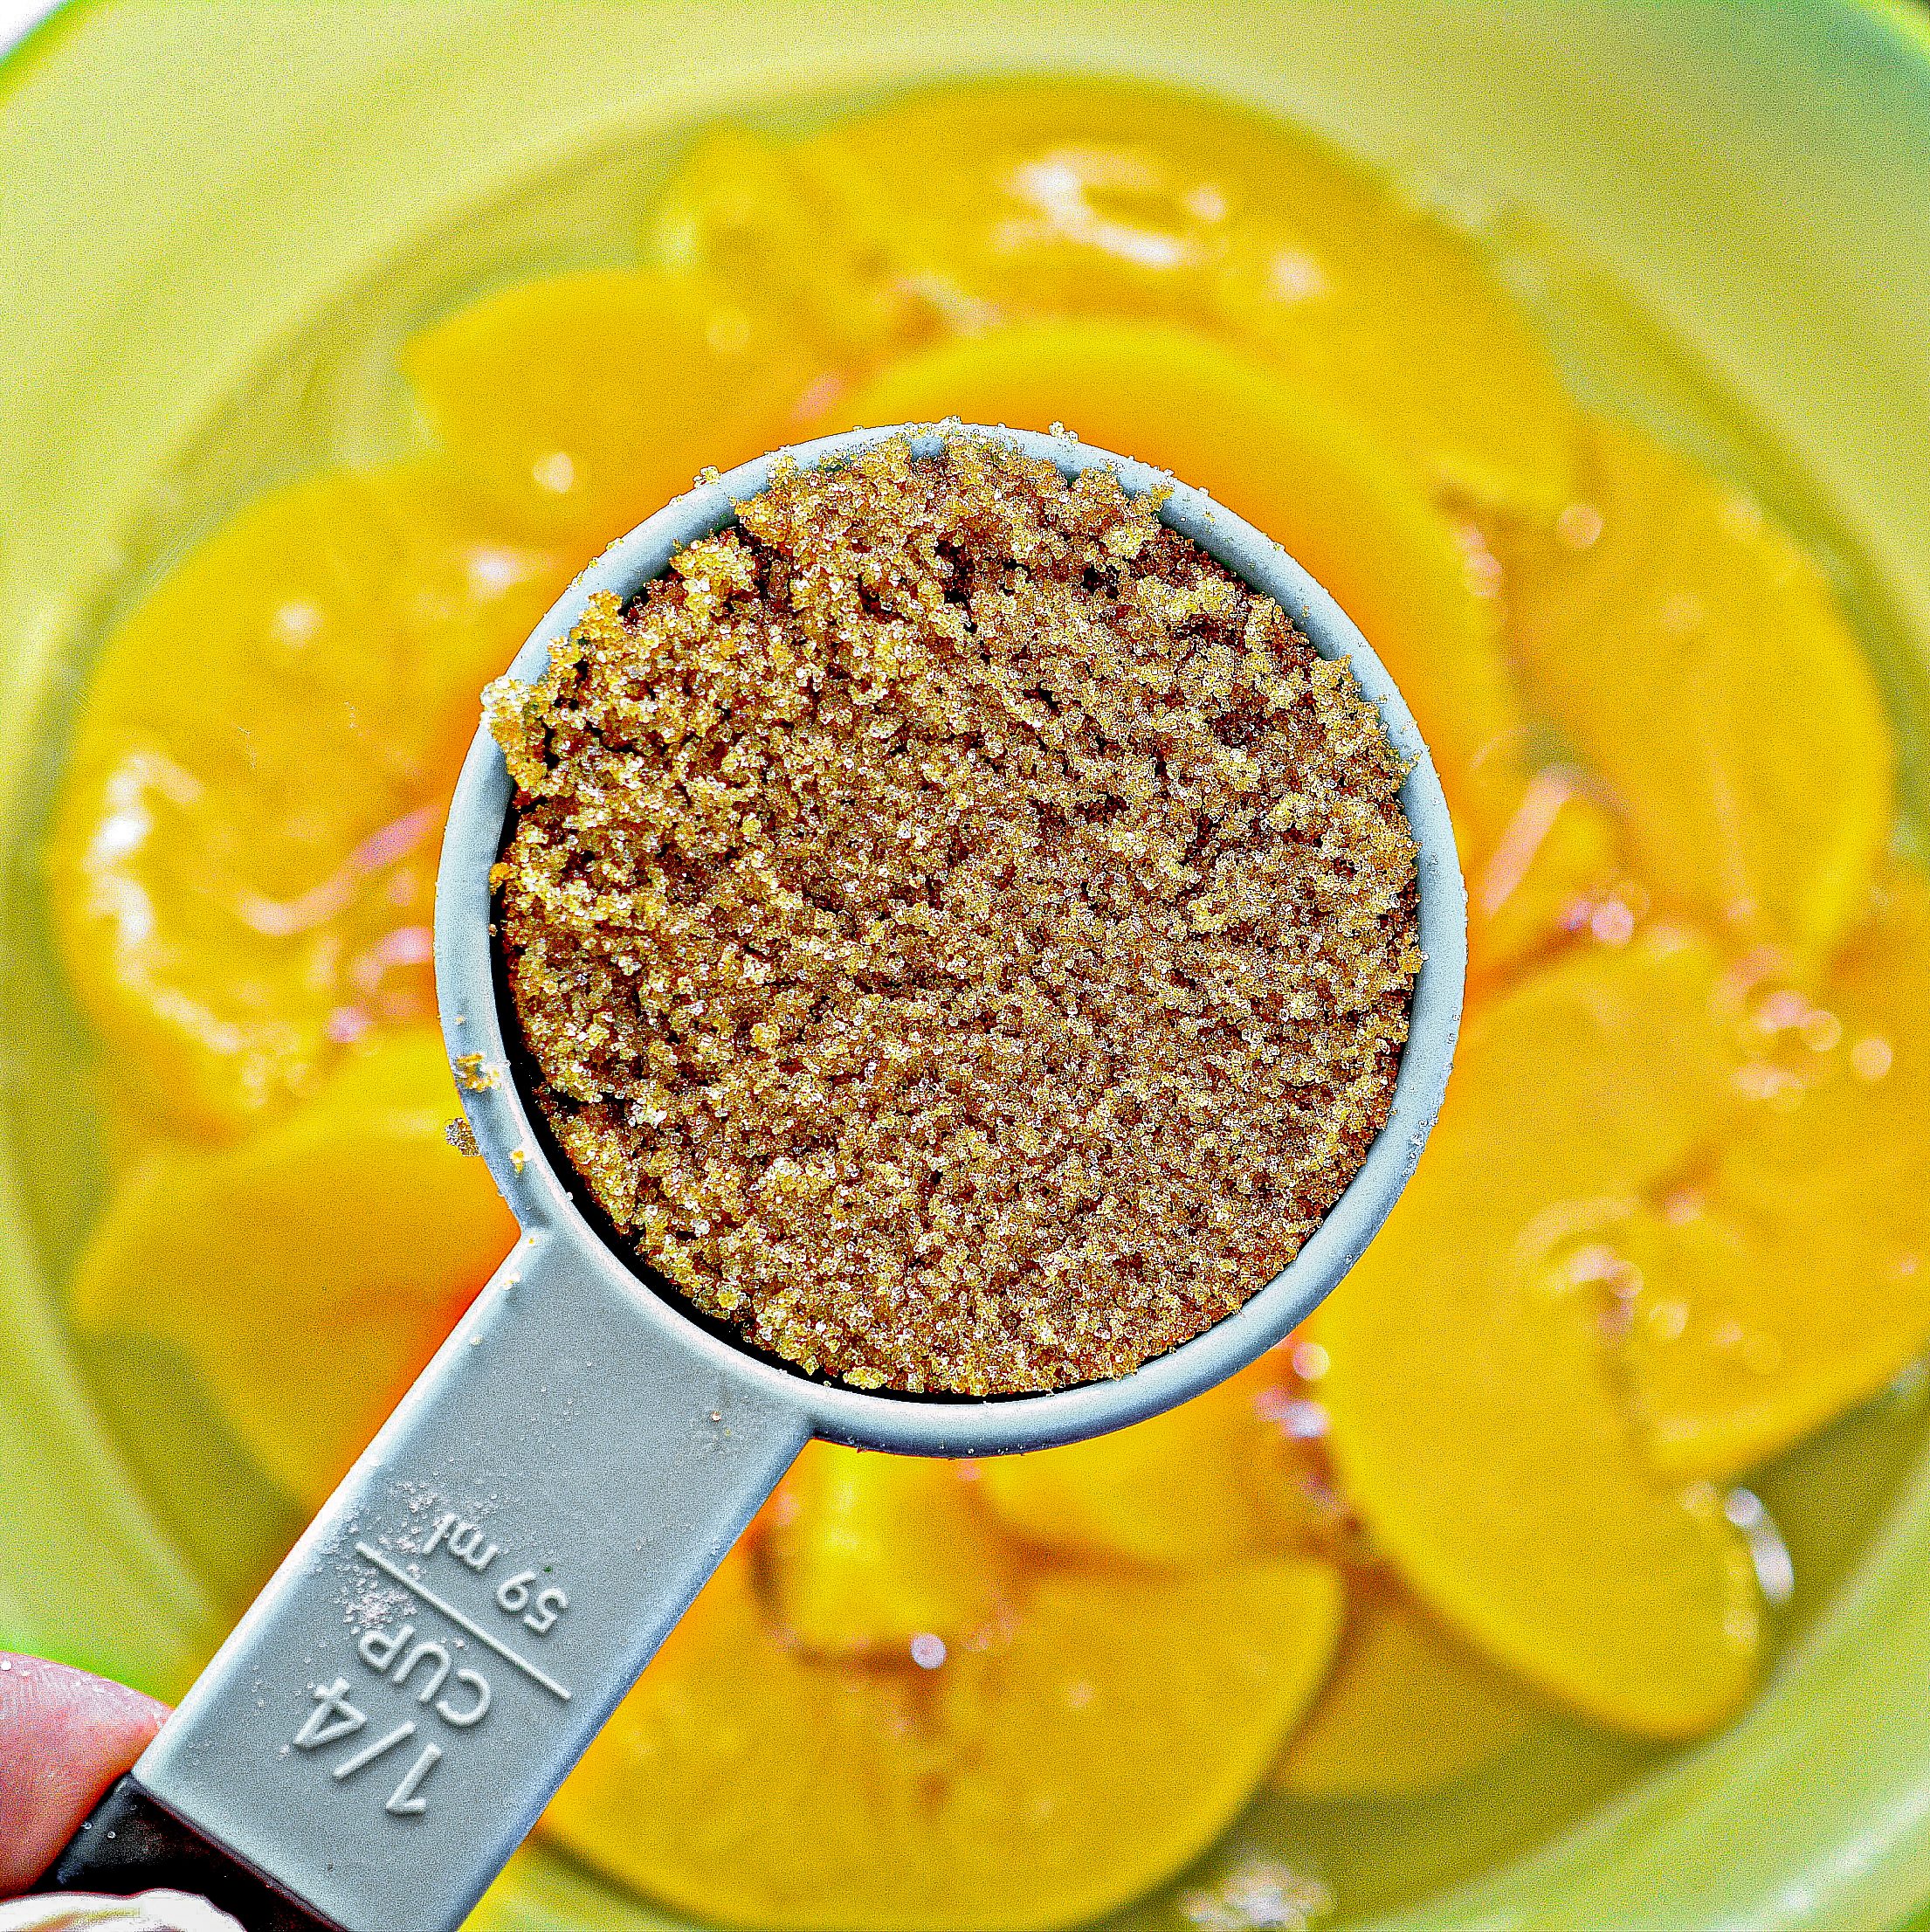 Add canned peaches and brown sugar into a bowl.